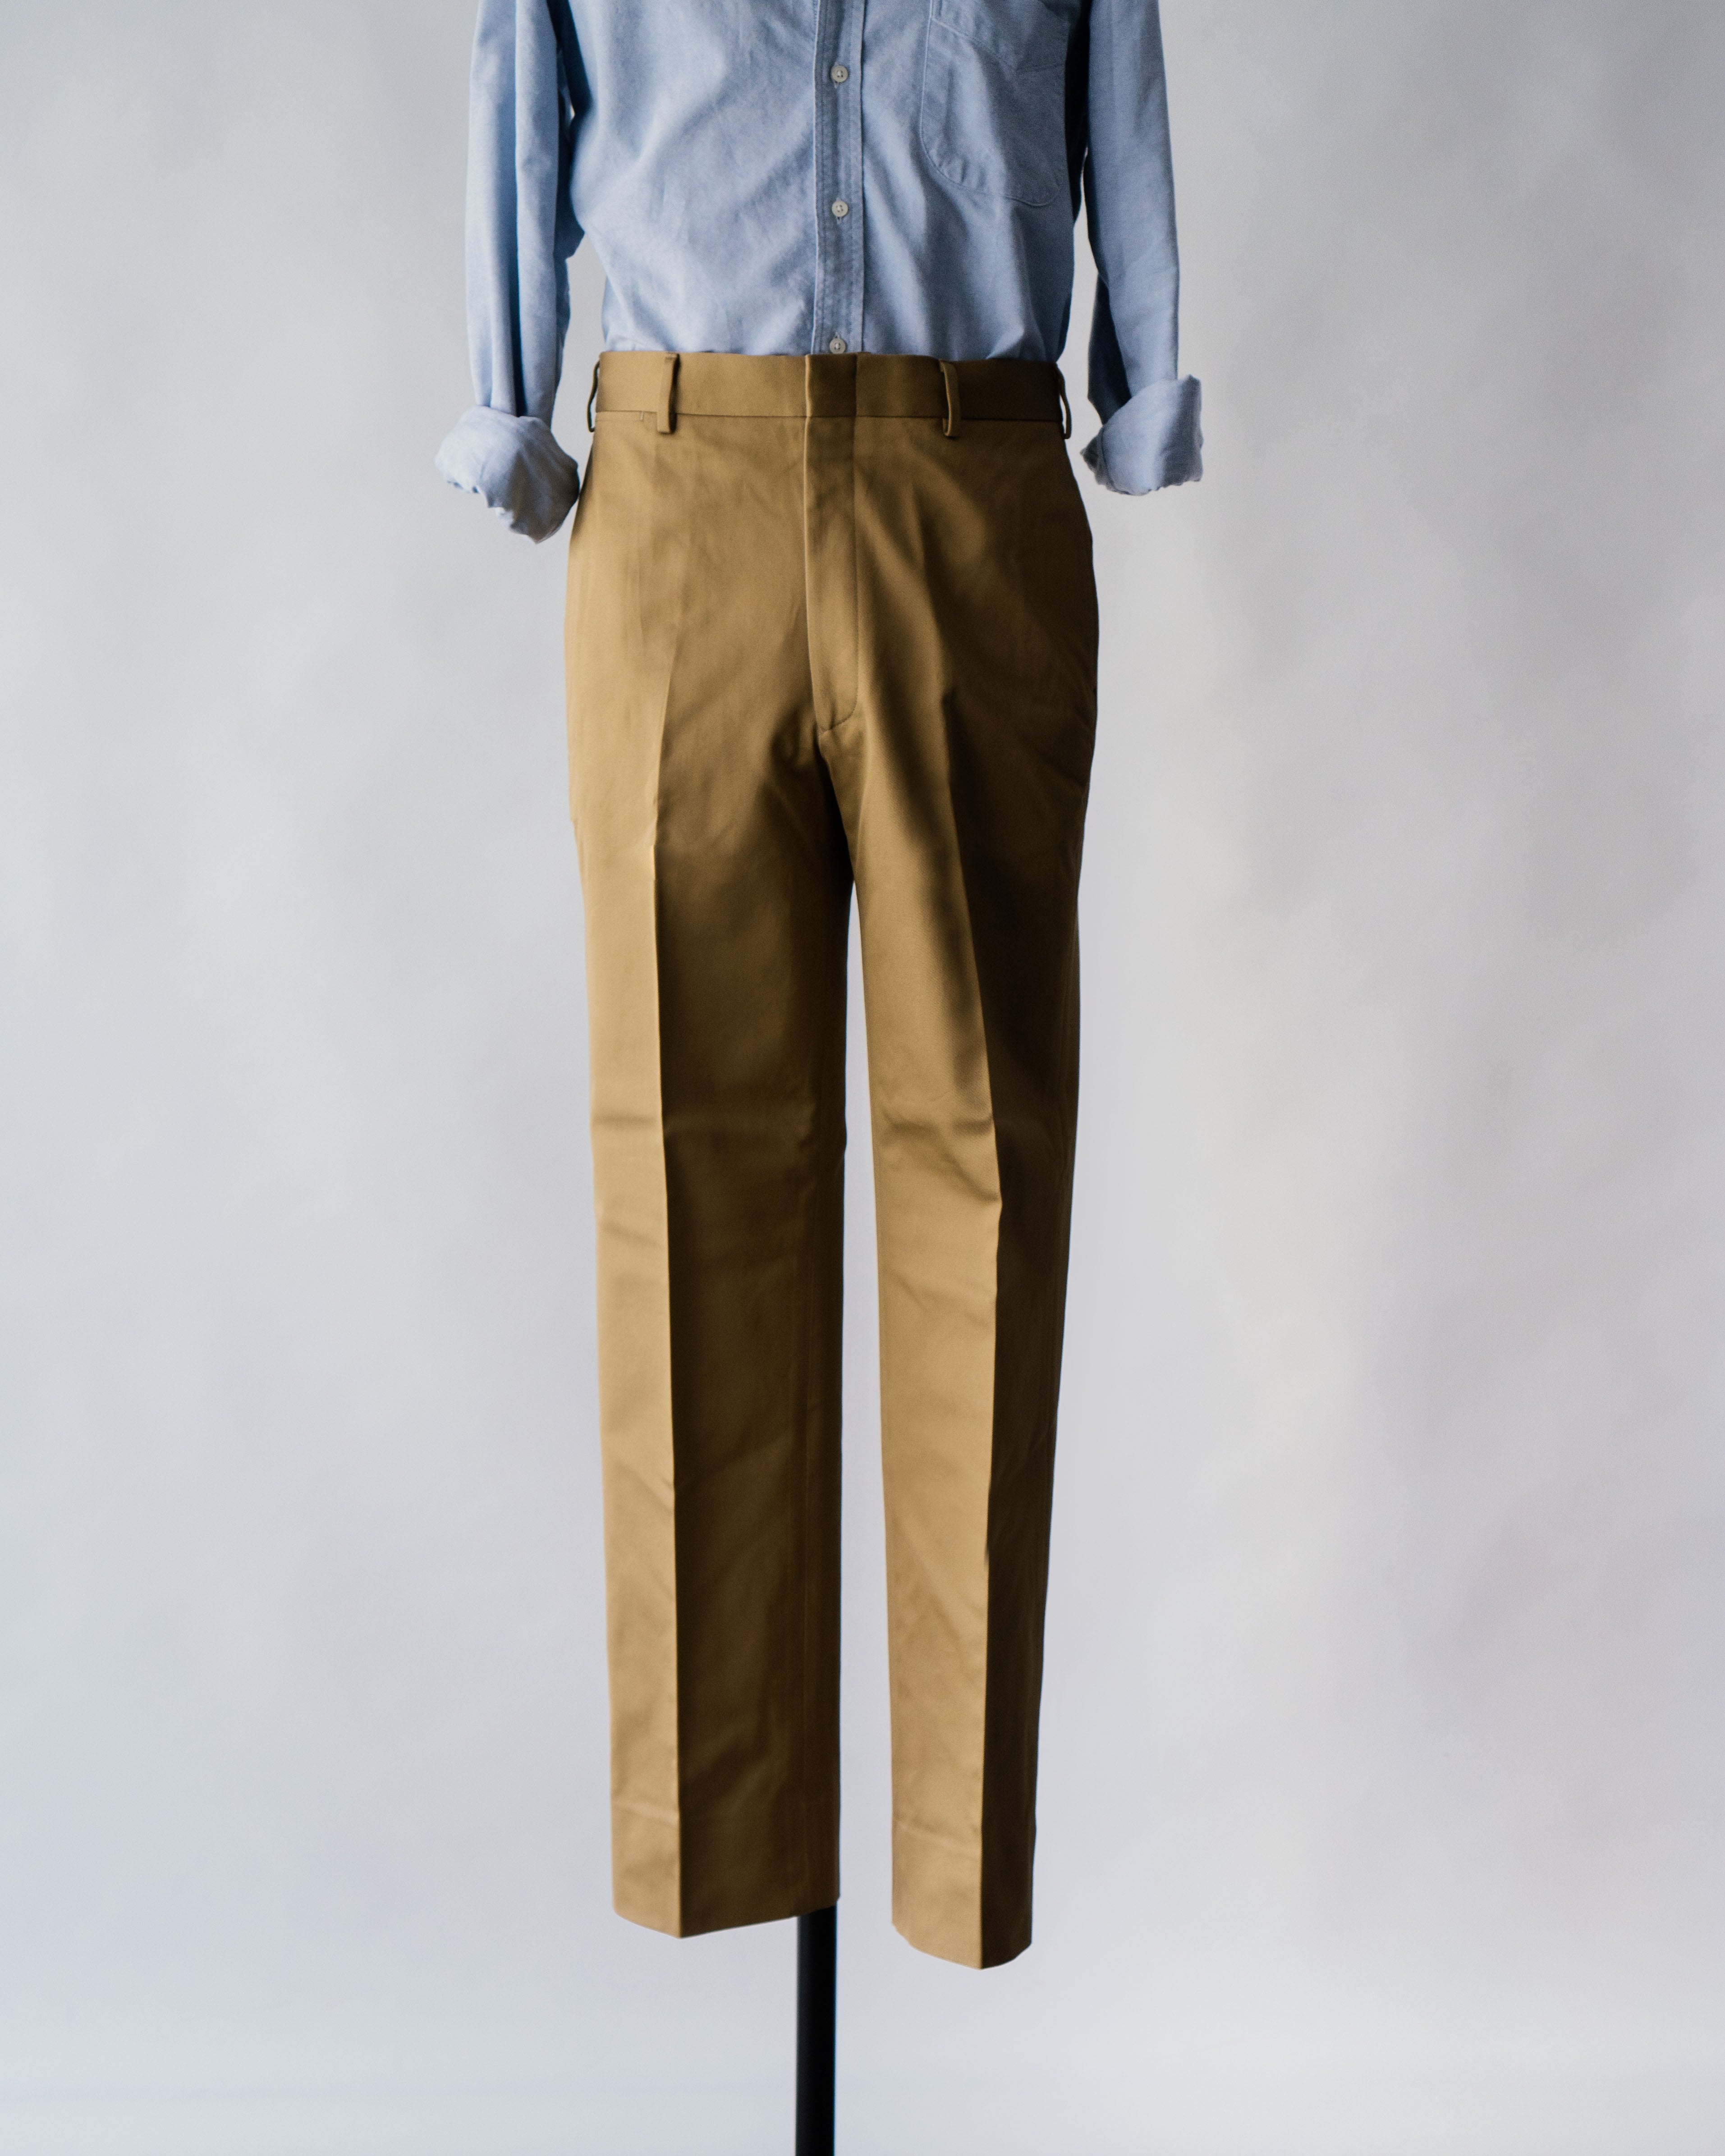 West Point Piped Stem Trousers | PPOVIM0901